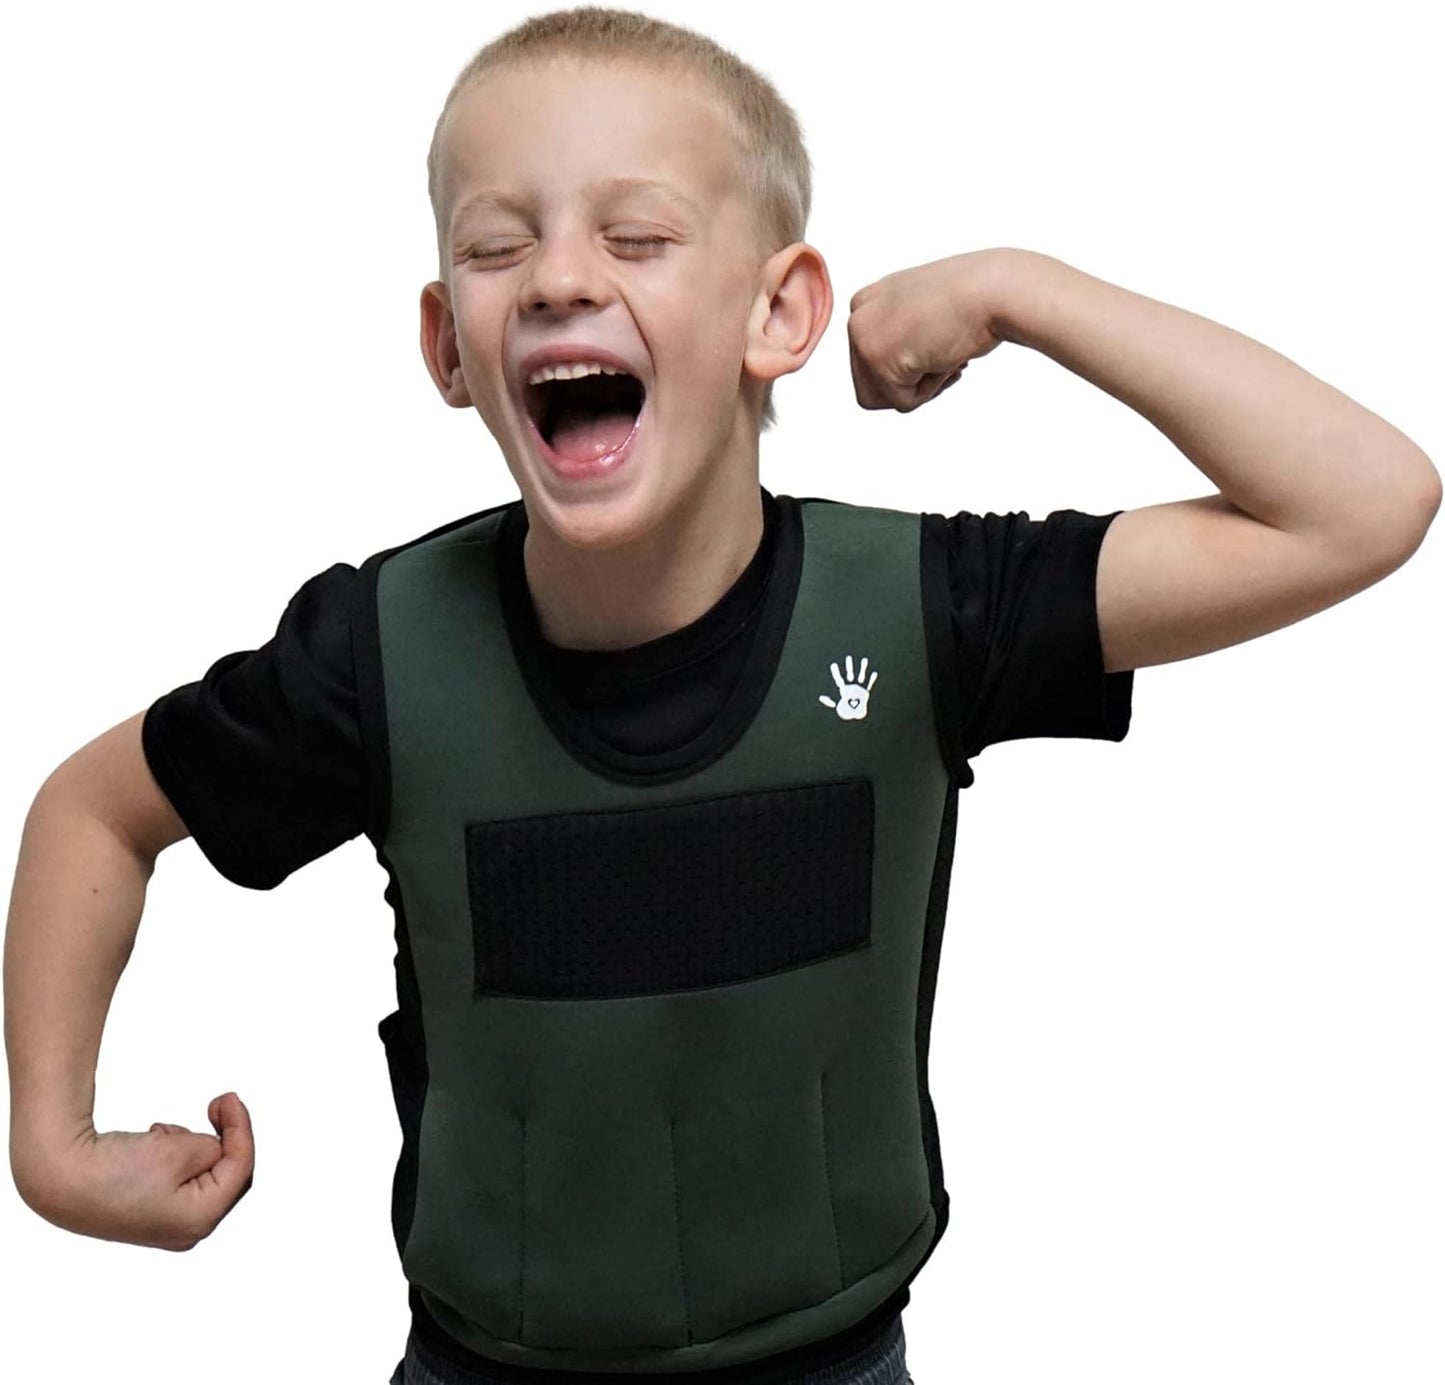 Weighted Vest for kids, weighted vests for kids 